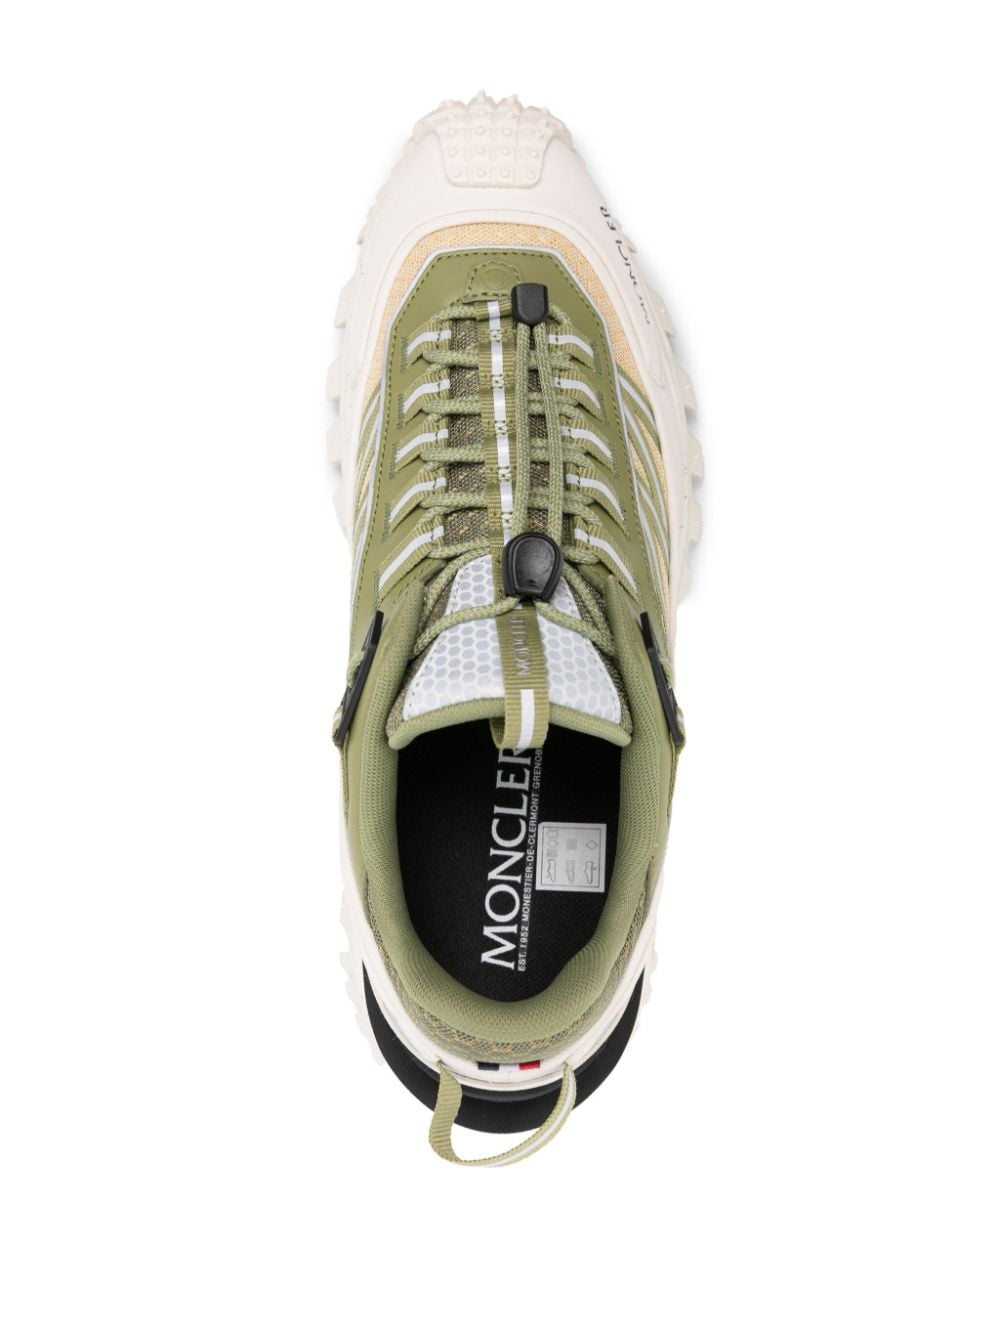 Trailgrip GTX lace-up sneakers<BR/><BR/><BR/>